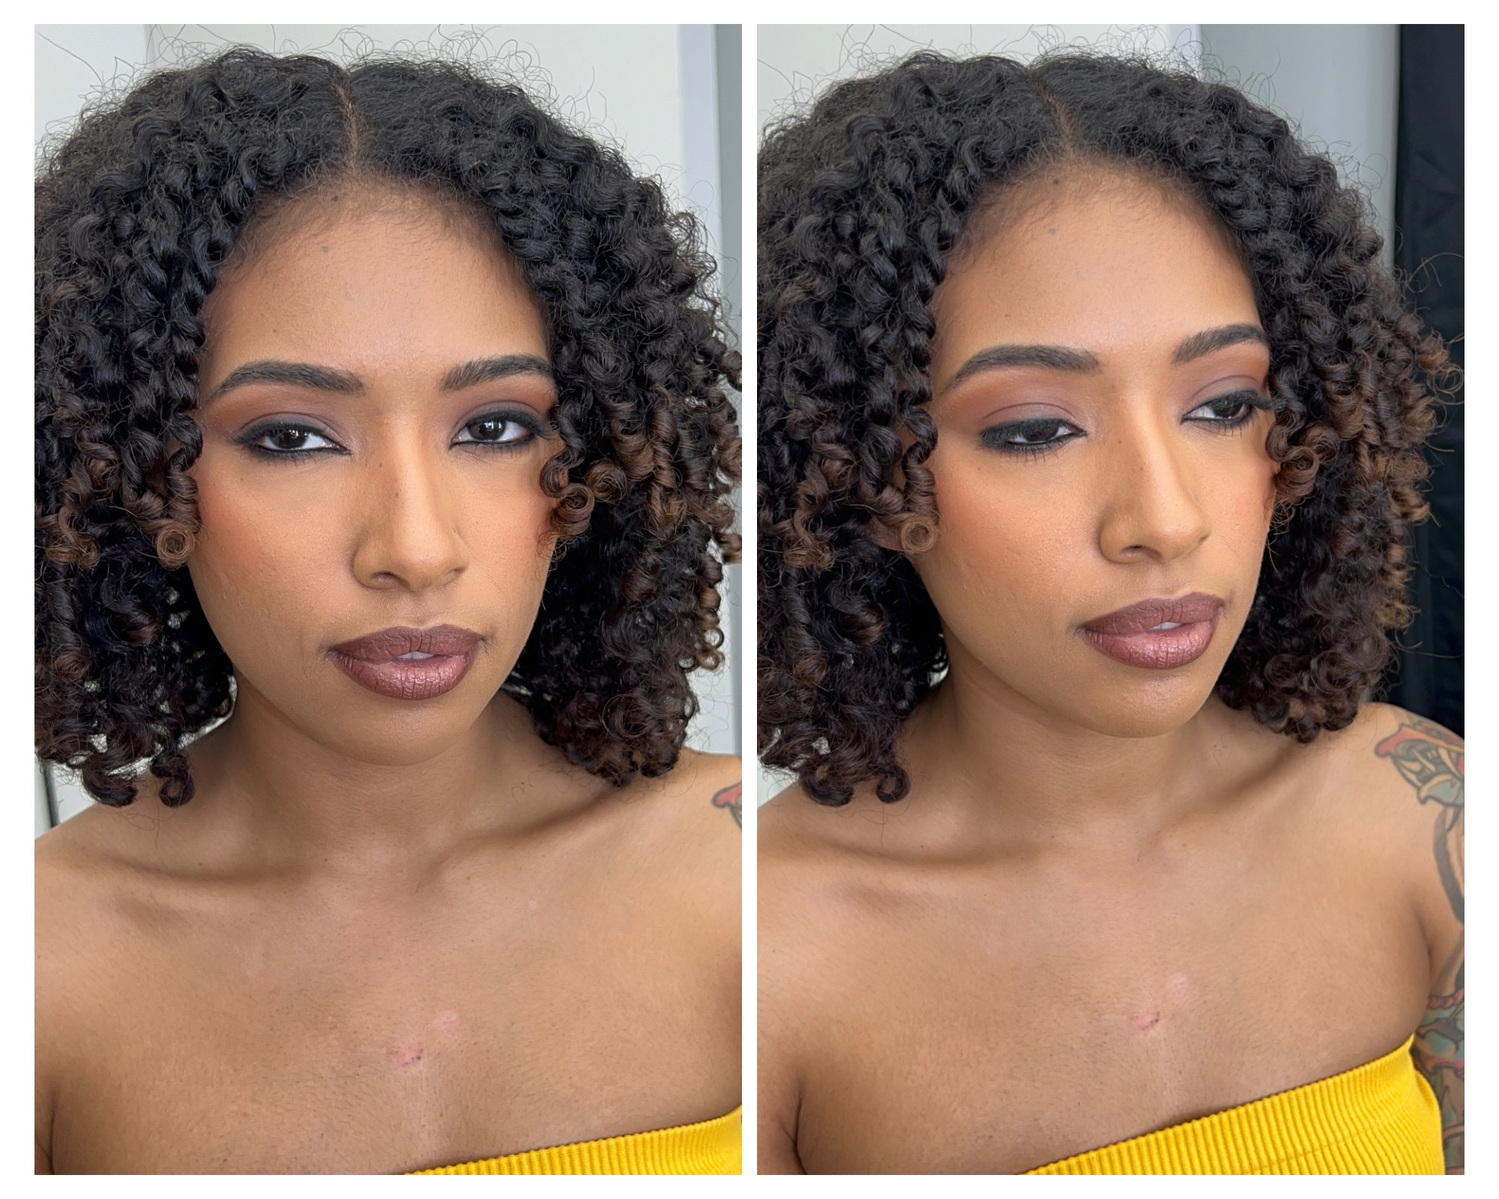 Photoshoot, Before and after, Dallas Photoshoot, Dallas Makeup artist